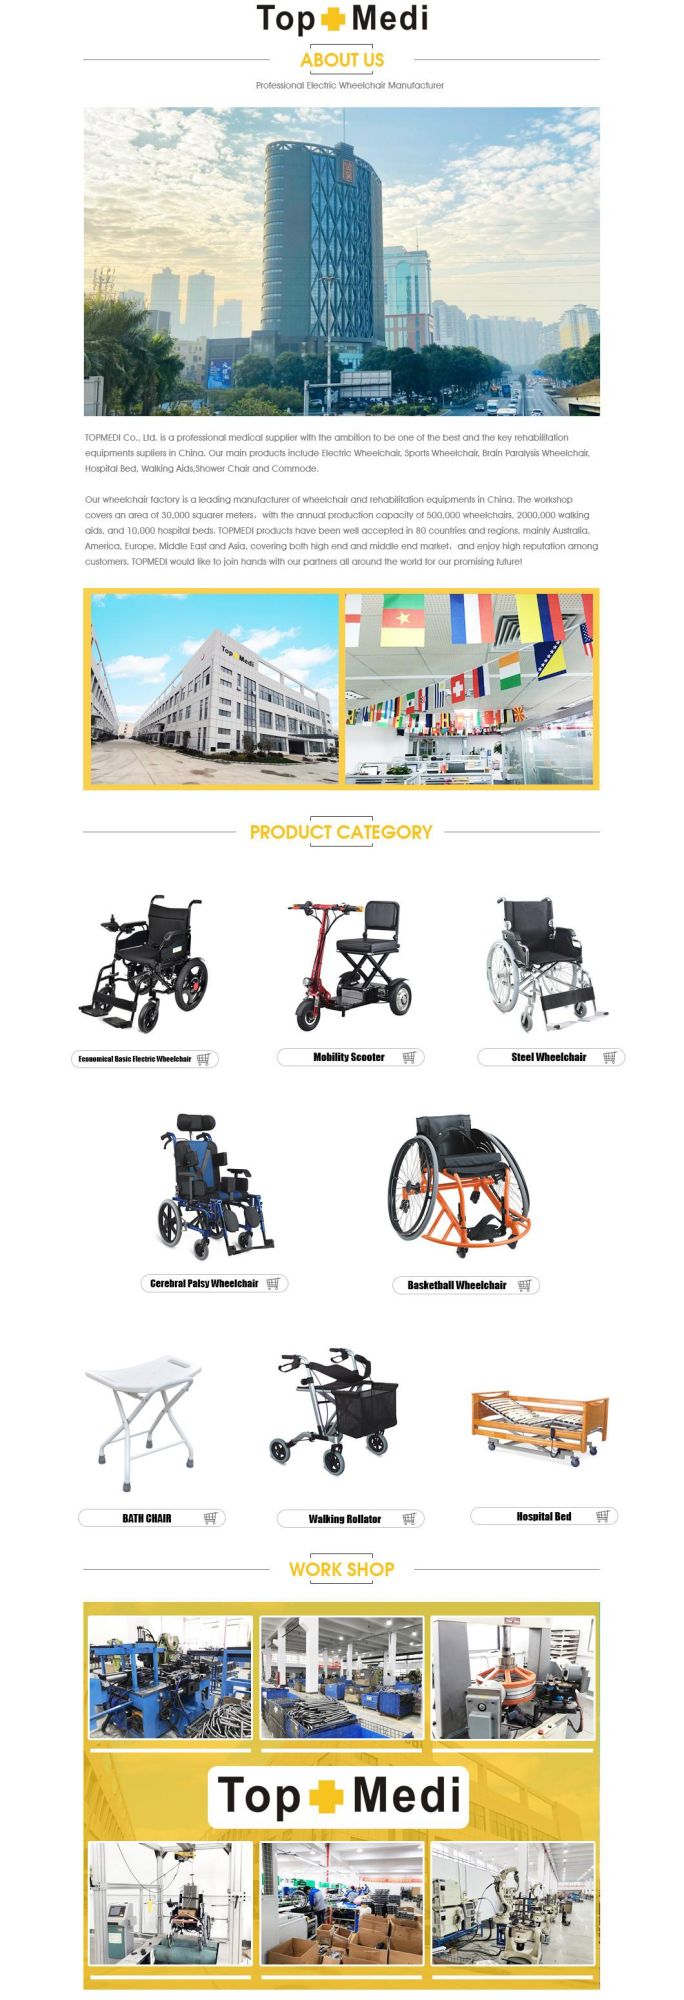 Electric Wheelchairs Lightweight Foldable, Magnesium Alloy Five Fork Wheel Wheelchair